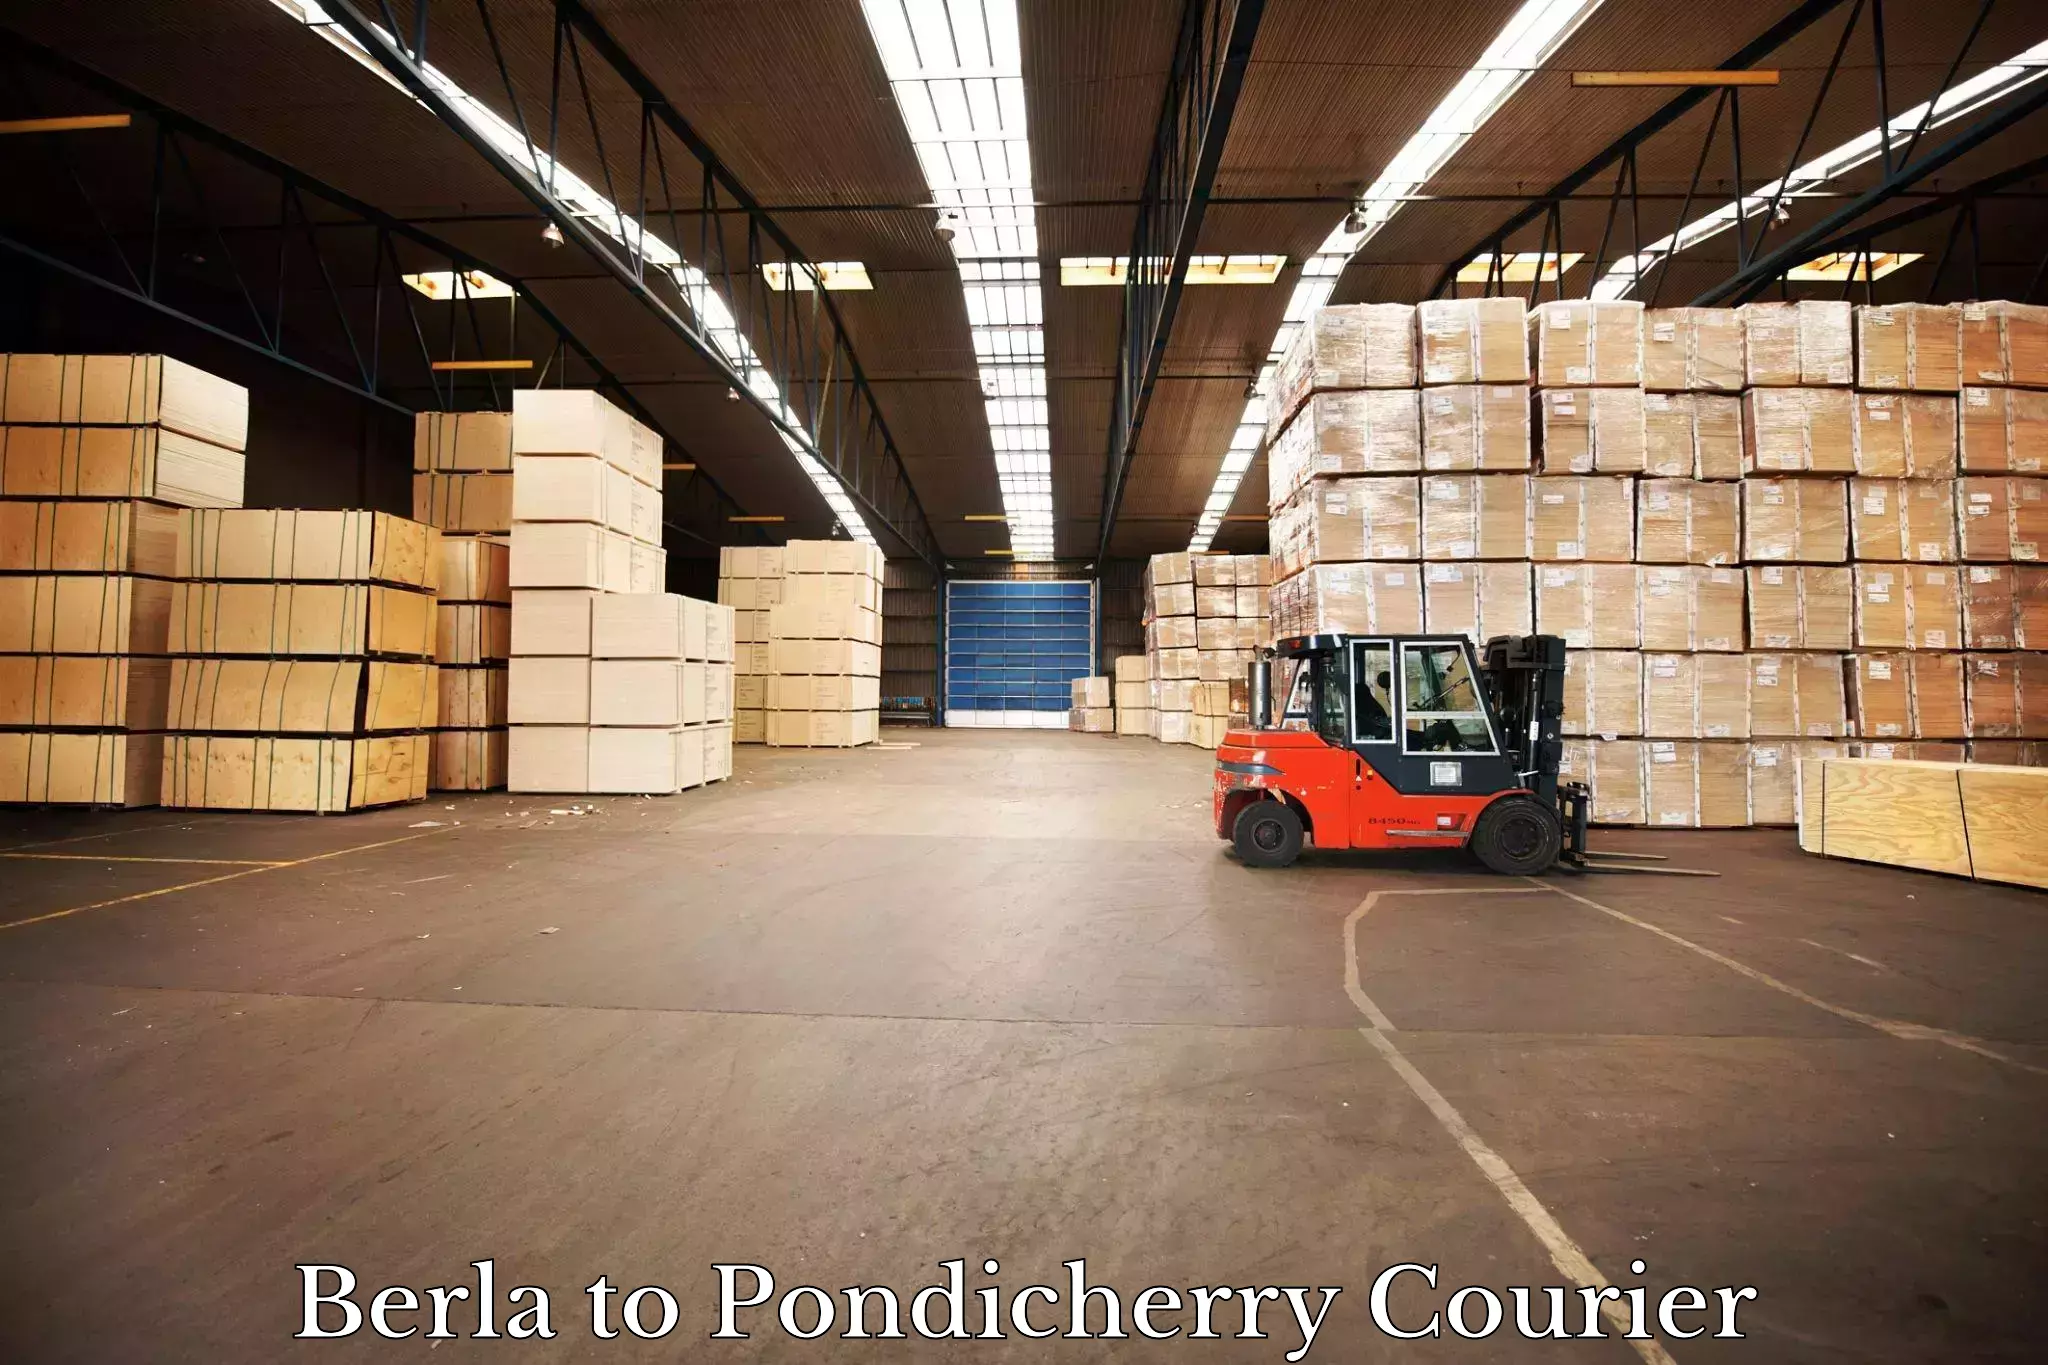 Enhanced shipping experience in Berla to Pondicherry